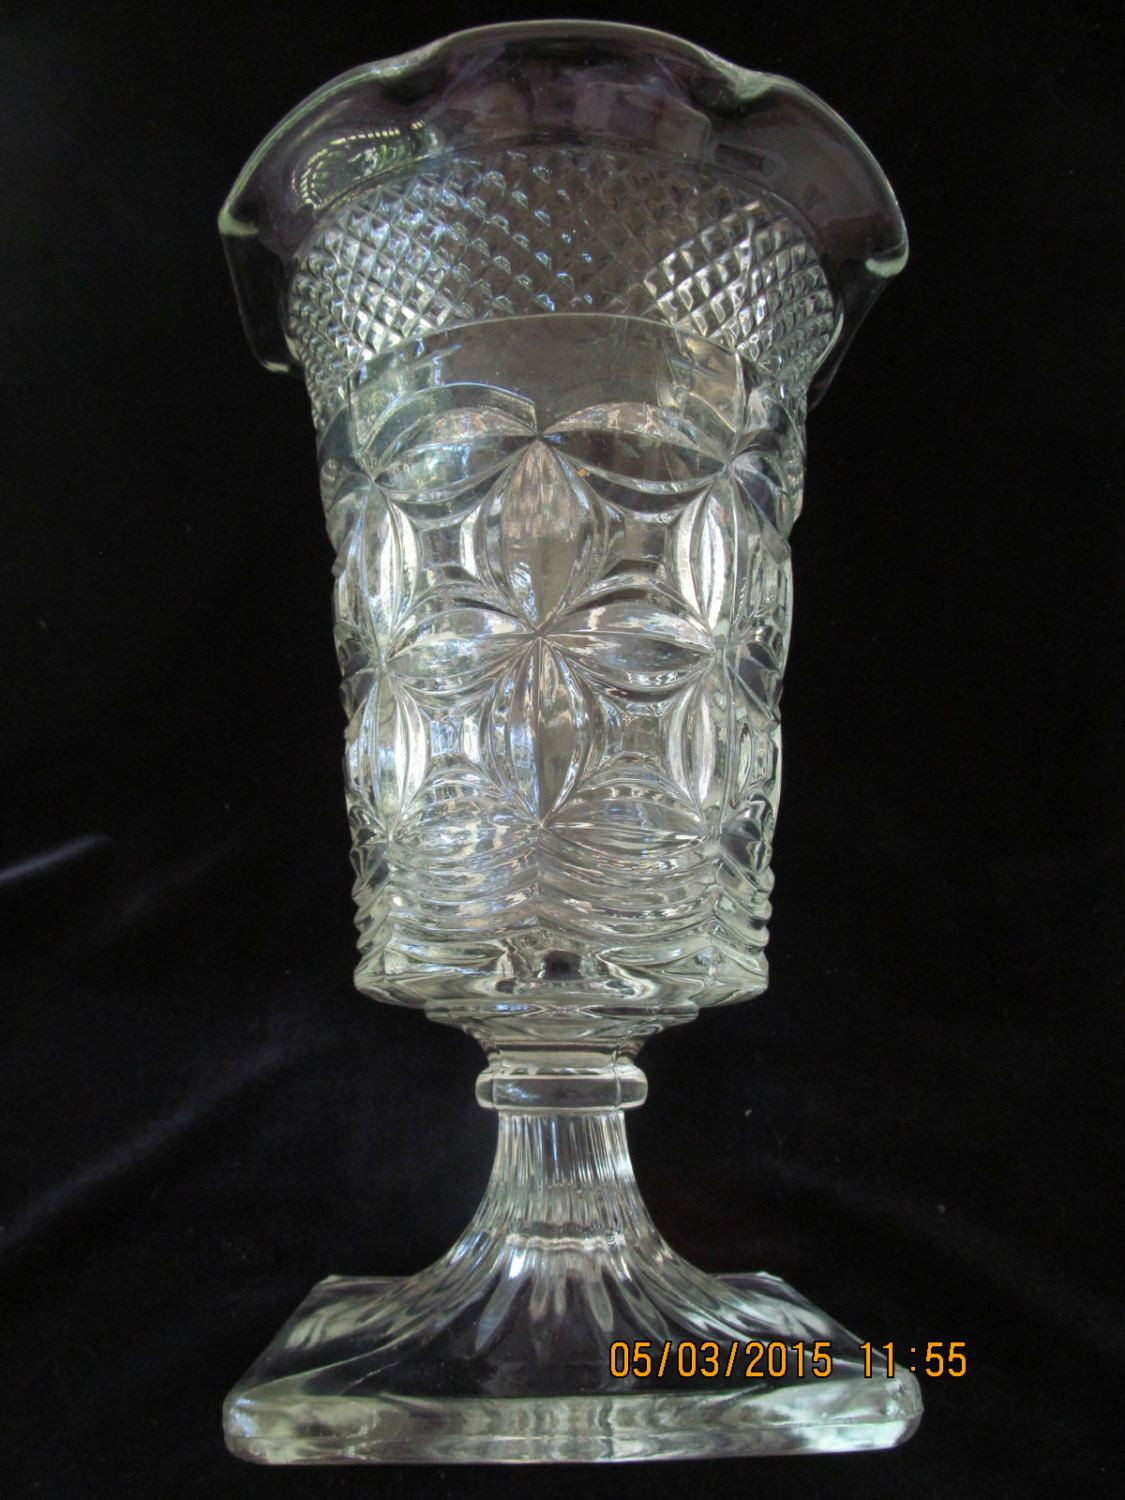 block crystal tulip vase of beautiful tall 10 3 4 early american pressed glass celery vase for beautiful tall 10 3 4 early american pressed glass celery vase pattern glass blown